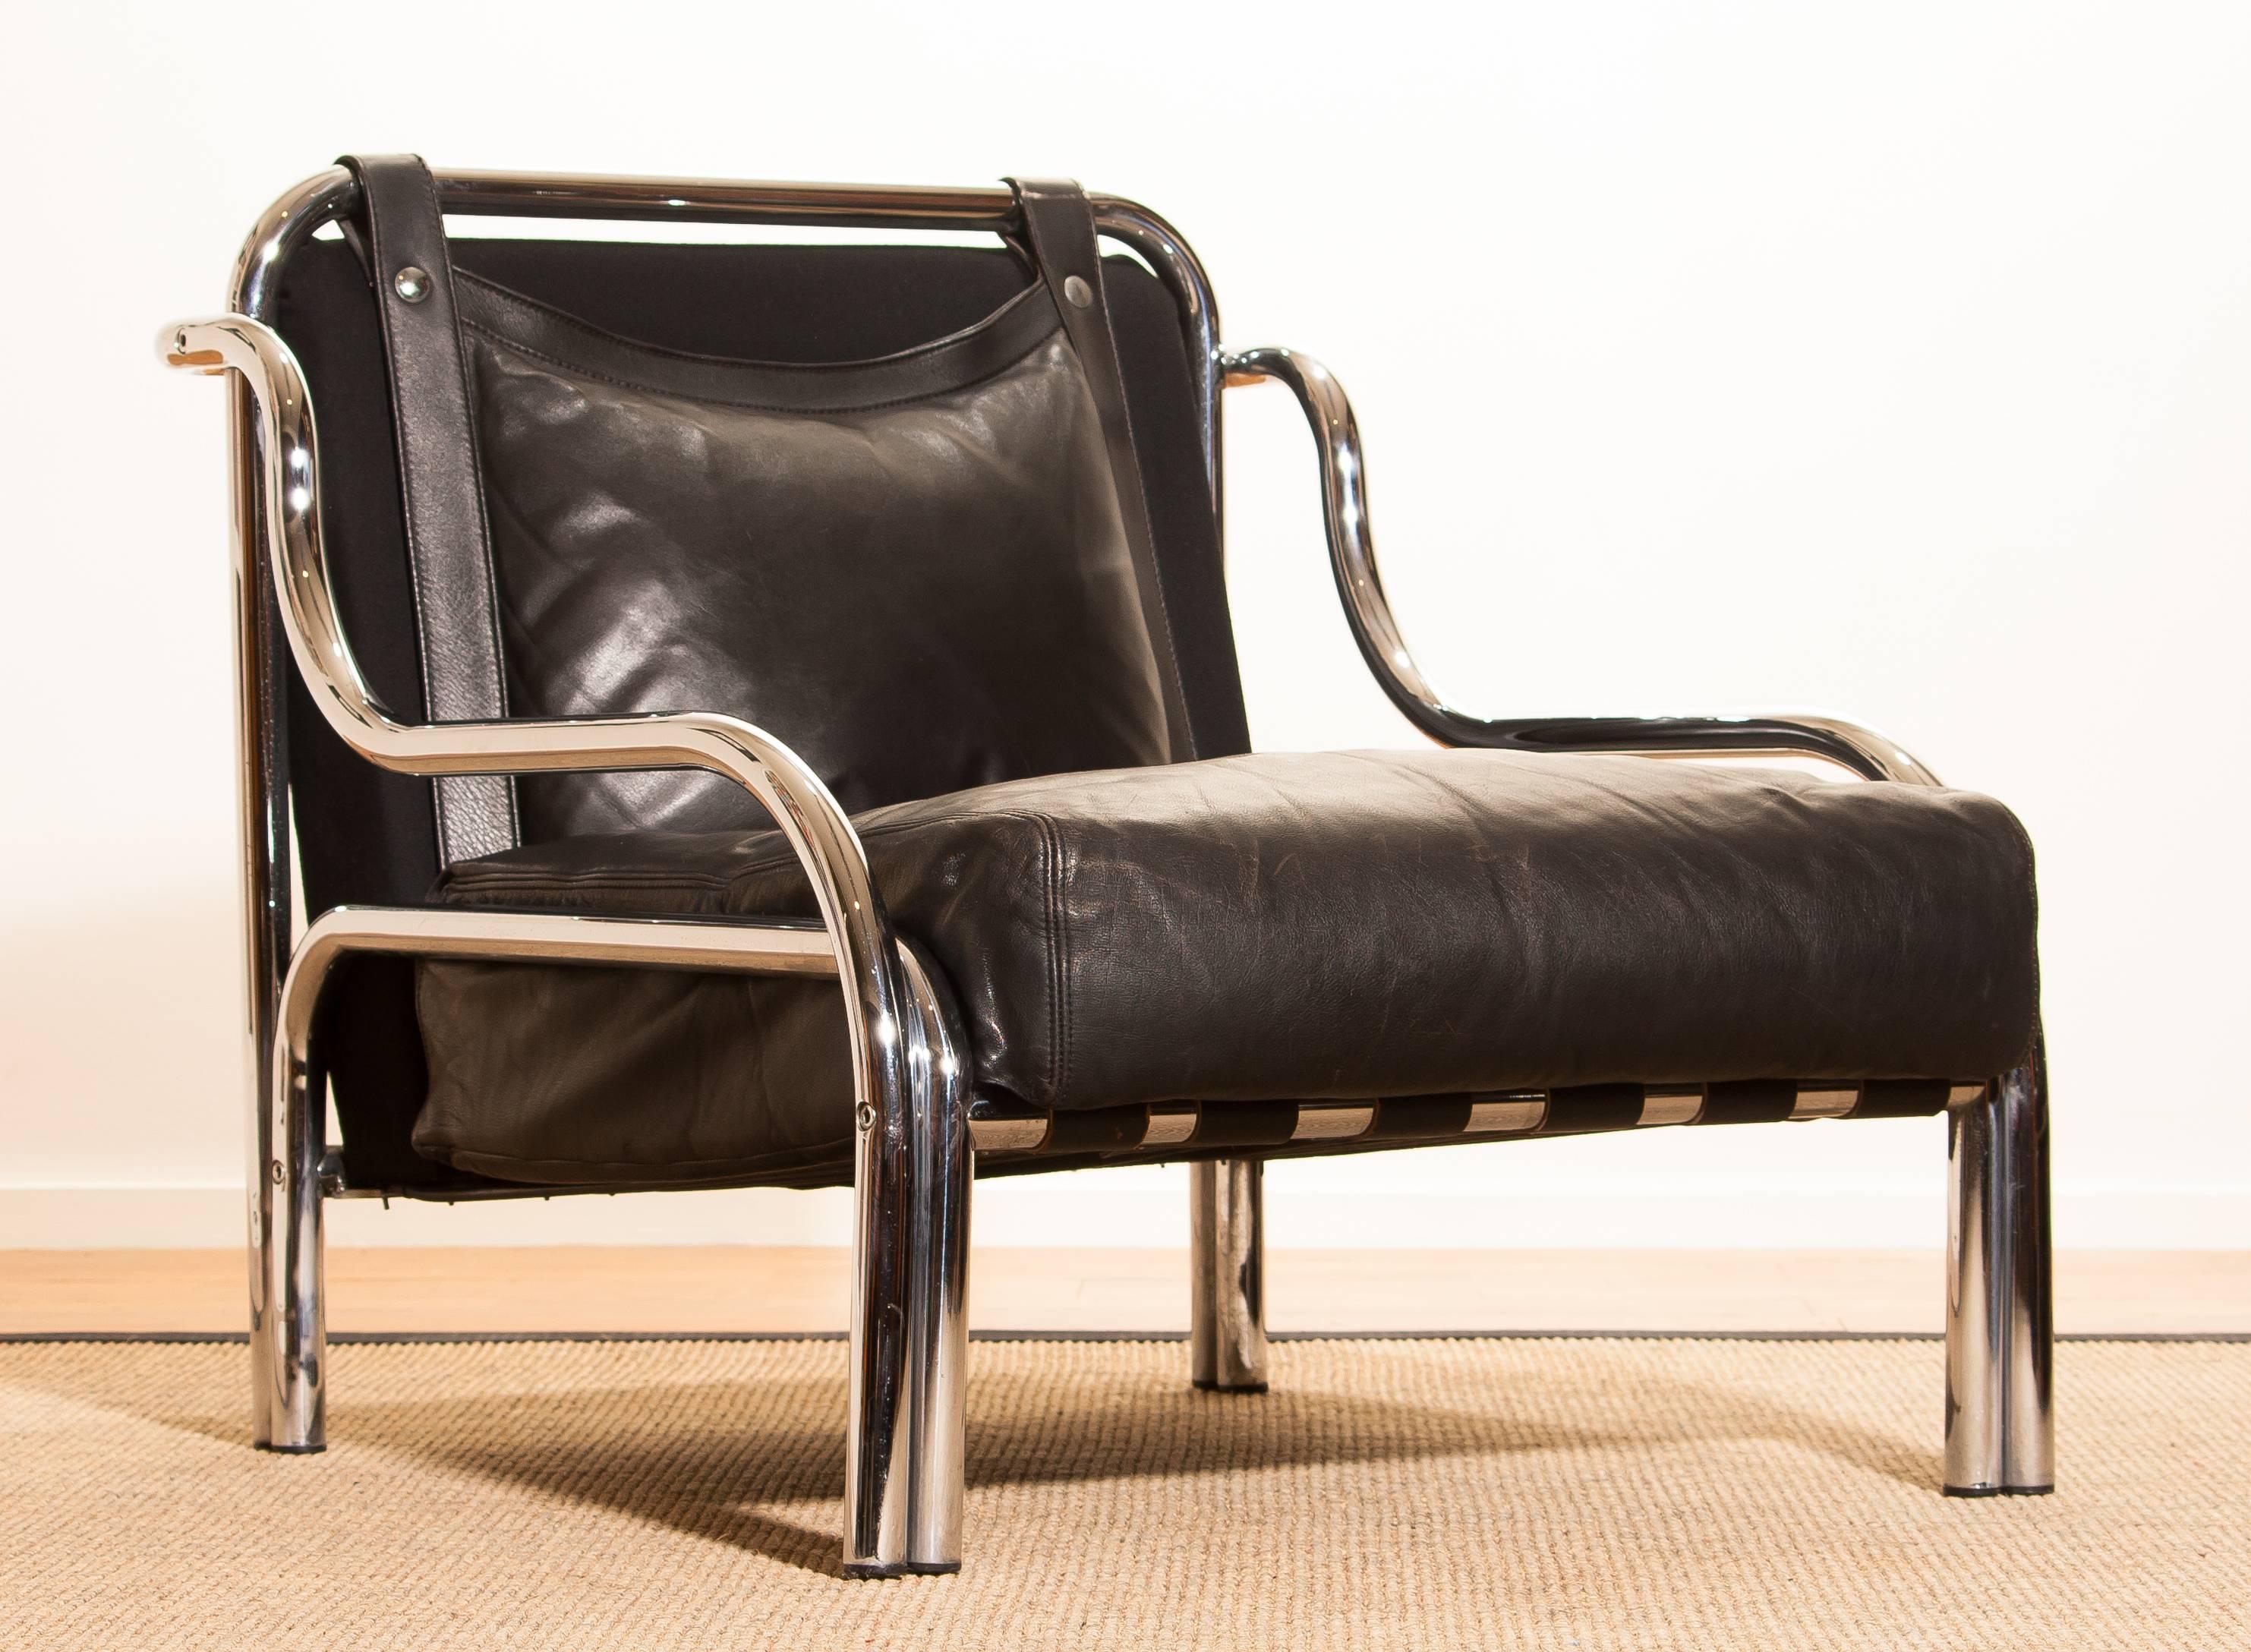 Wonderful lounge chair designed by Gae Aulenti for Poltronova, Italy.
This beautiful chair is made of a black leather seating on a chromed frame.
It is in an excellent condition.
Period 1960s
Dimensions: H. 73 cm, W. 71 cm, D. 80 cm, SH. 30